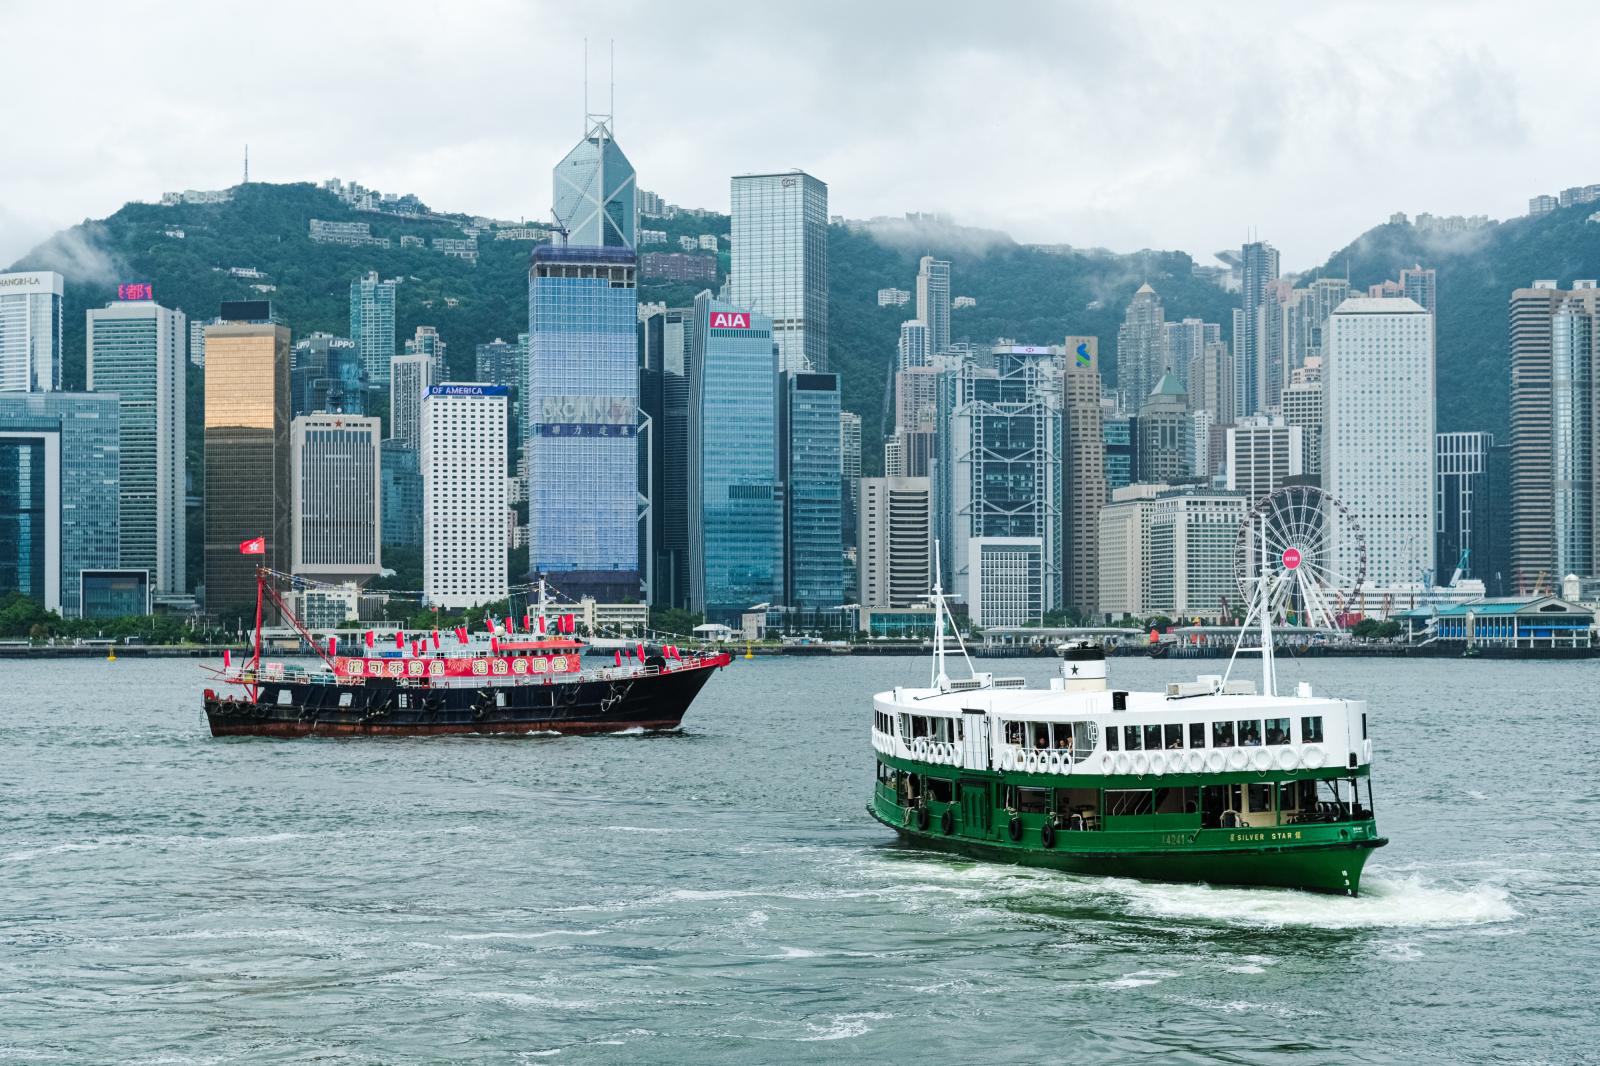 A star ferry and a fishing boat...rom Britain to China on July 1.